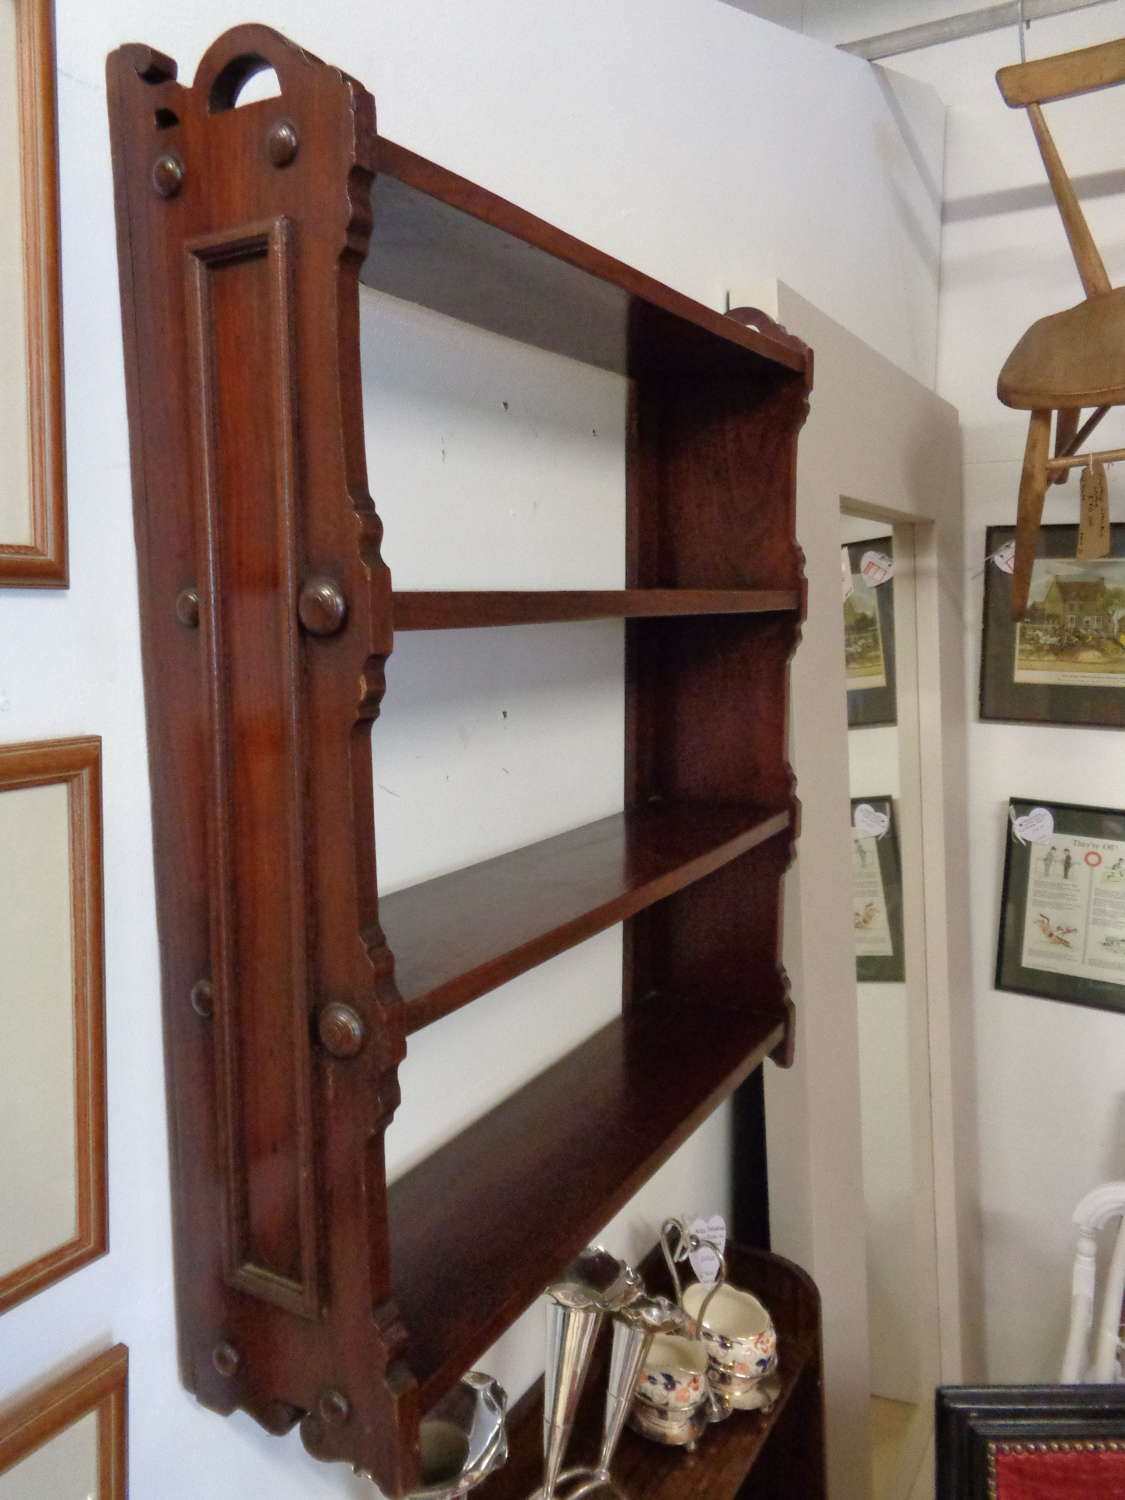 Antique Mahogany Book Shelves - Freestanding or Wall Mounted